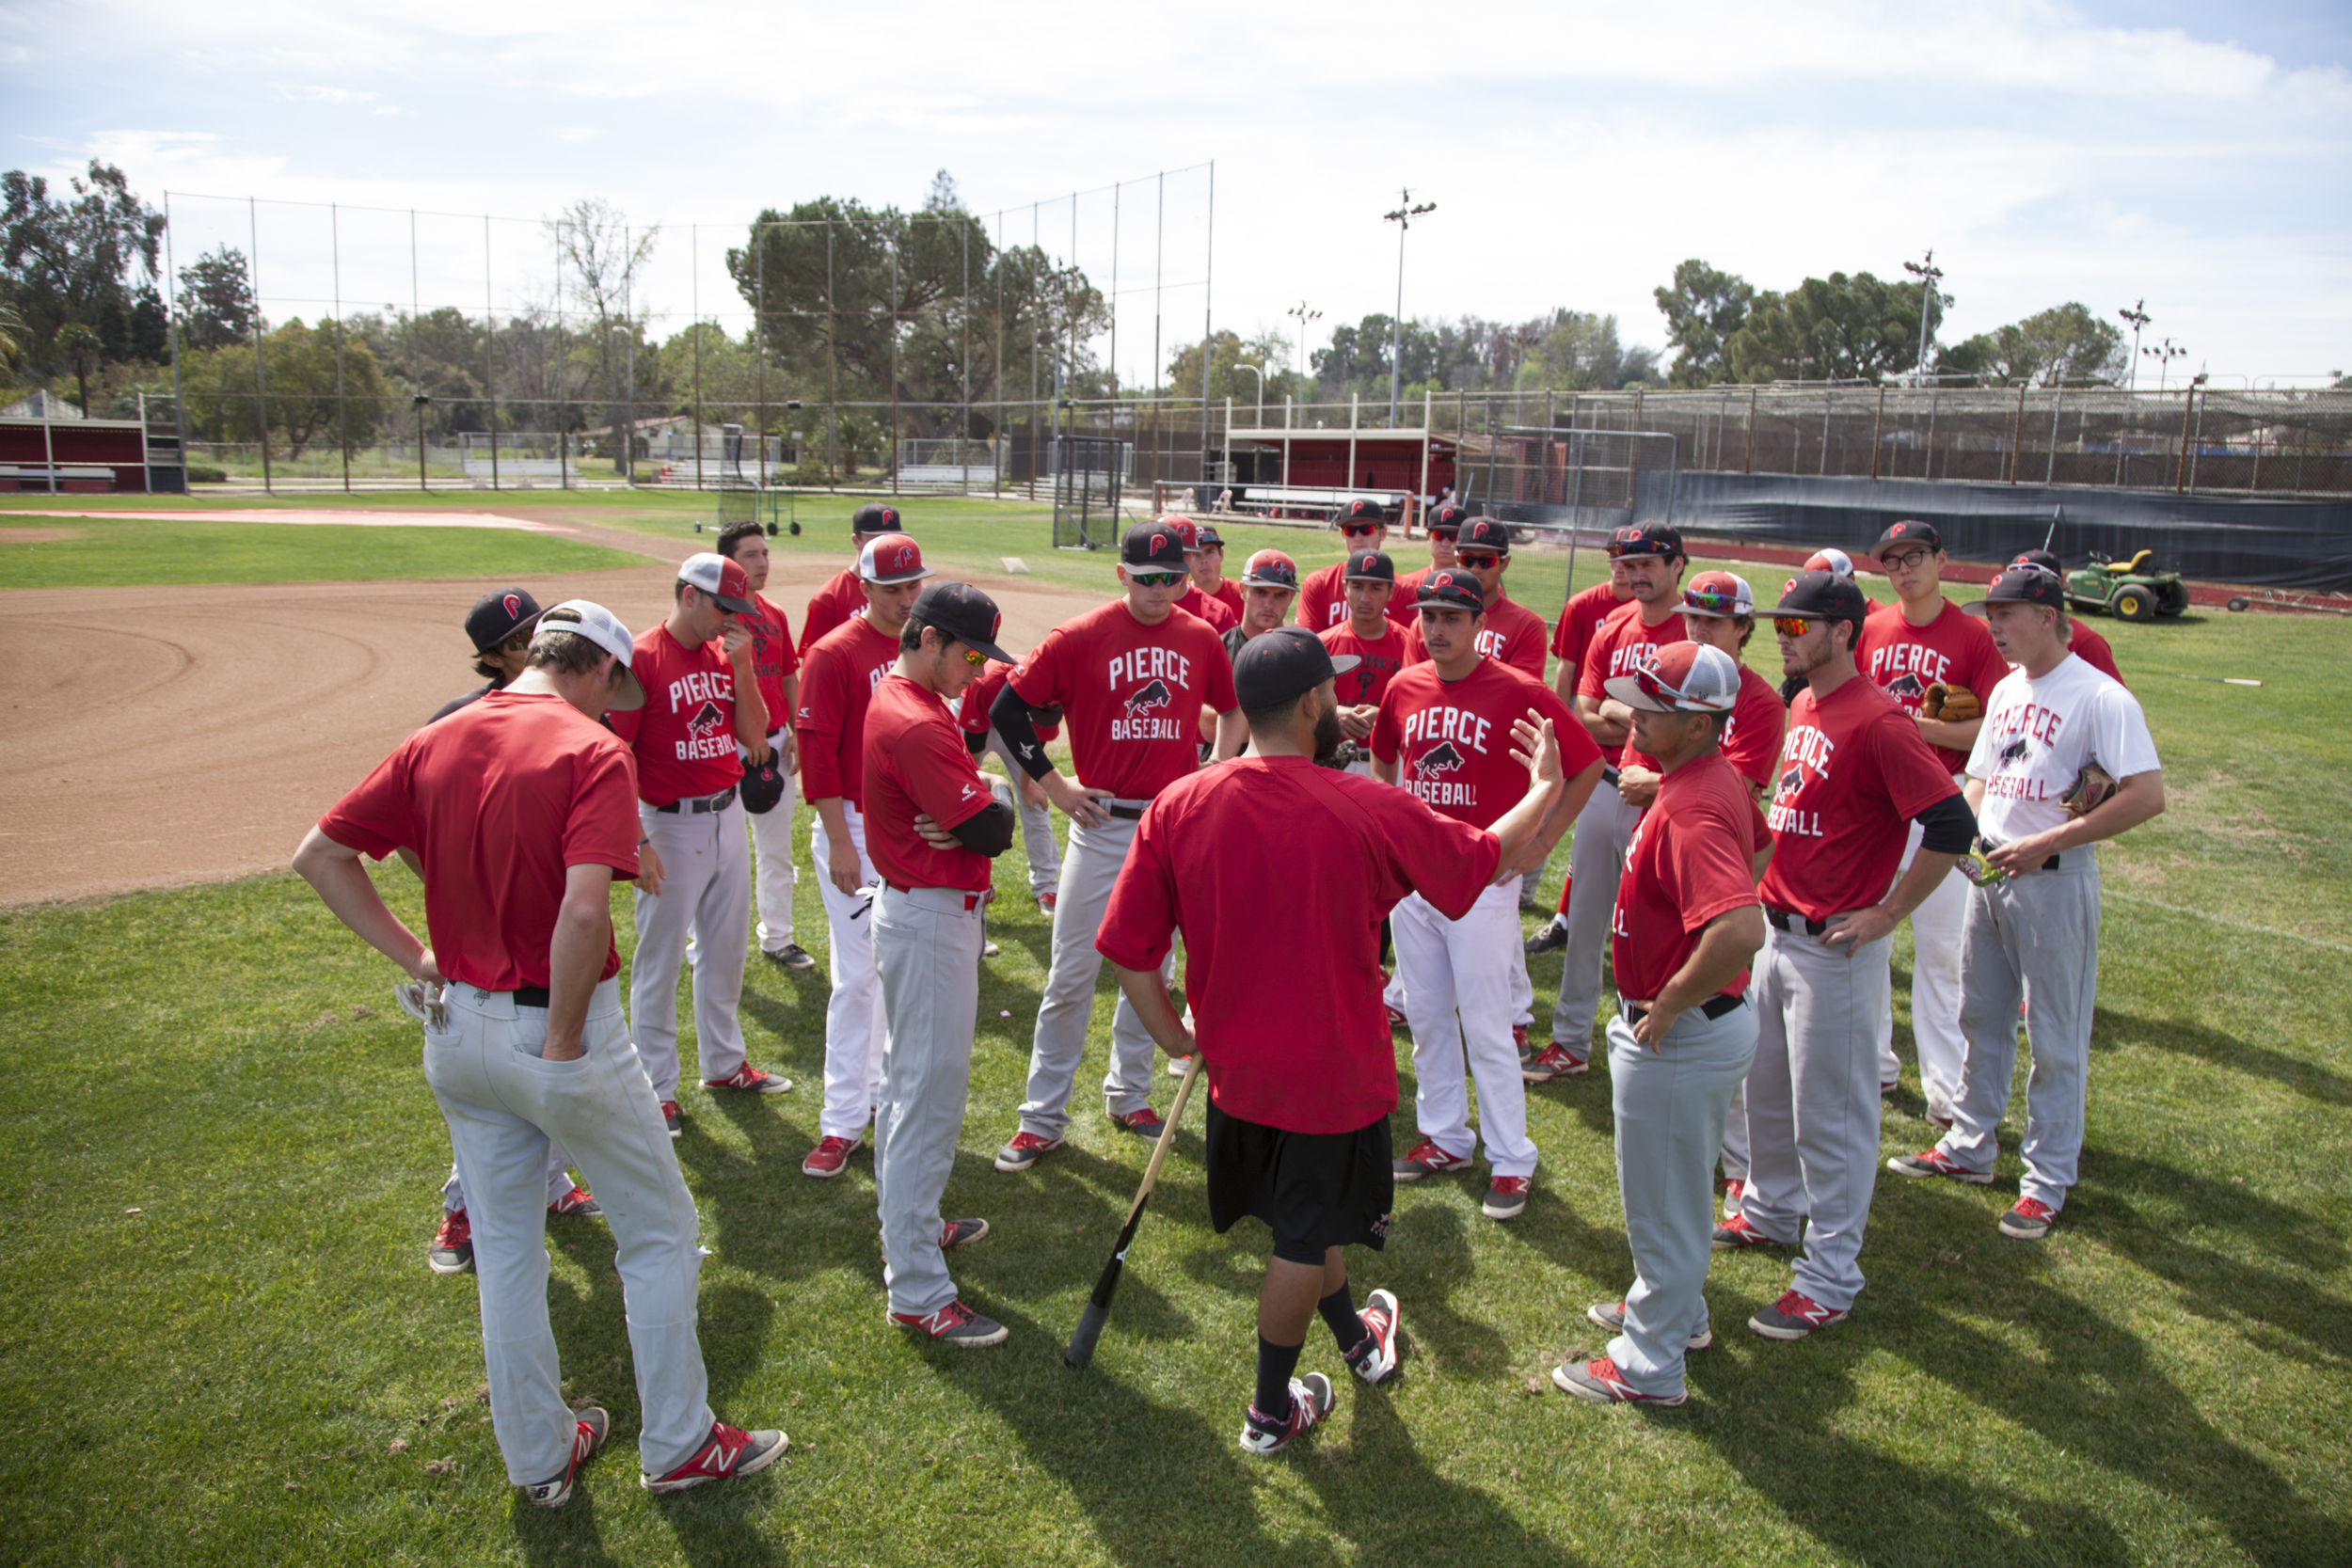  Assistant coach Willie Cabrera, center, meets with members of Pierce College's baseball team on Tuesday, March 10, 2015,&nbsp;to talk about the upcoming games the team will play for the semester. Woodland Hills, Calif.  Read the full story  here  